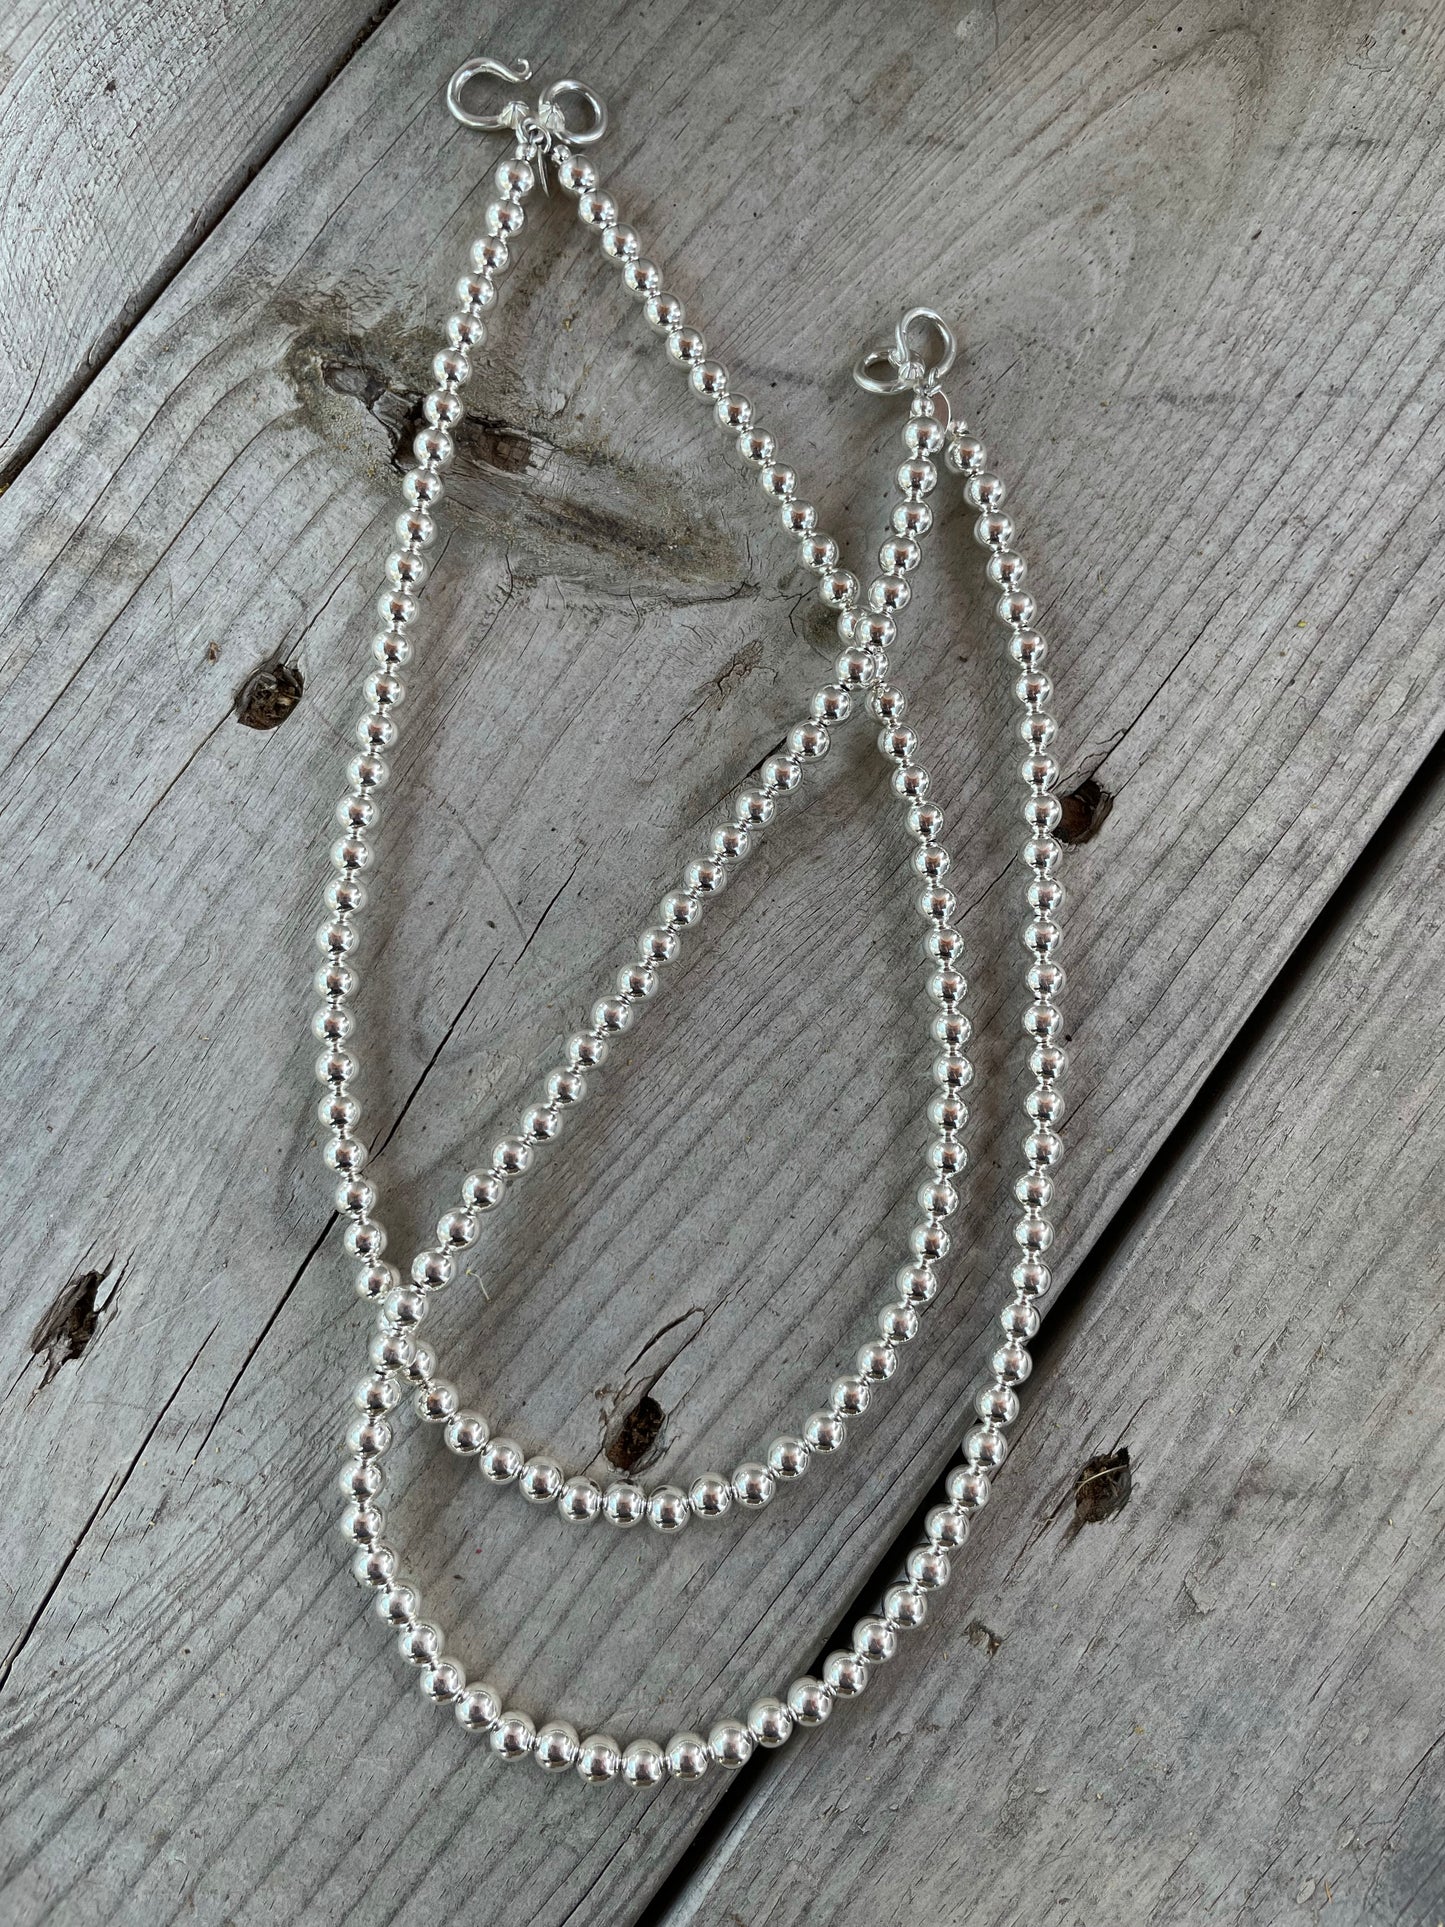 6mm High Shine Navajo Pearl Necklace